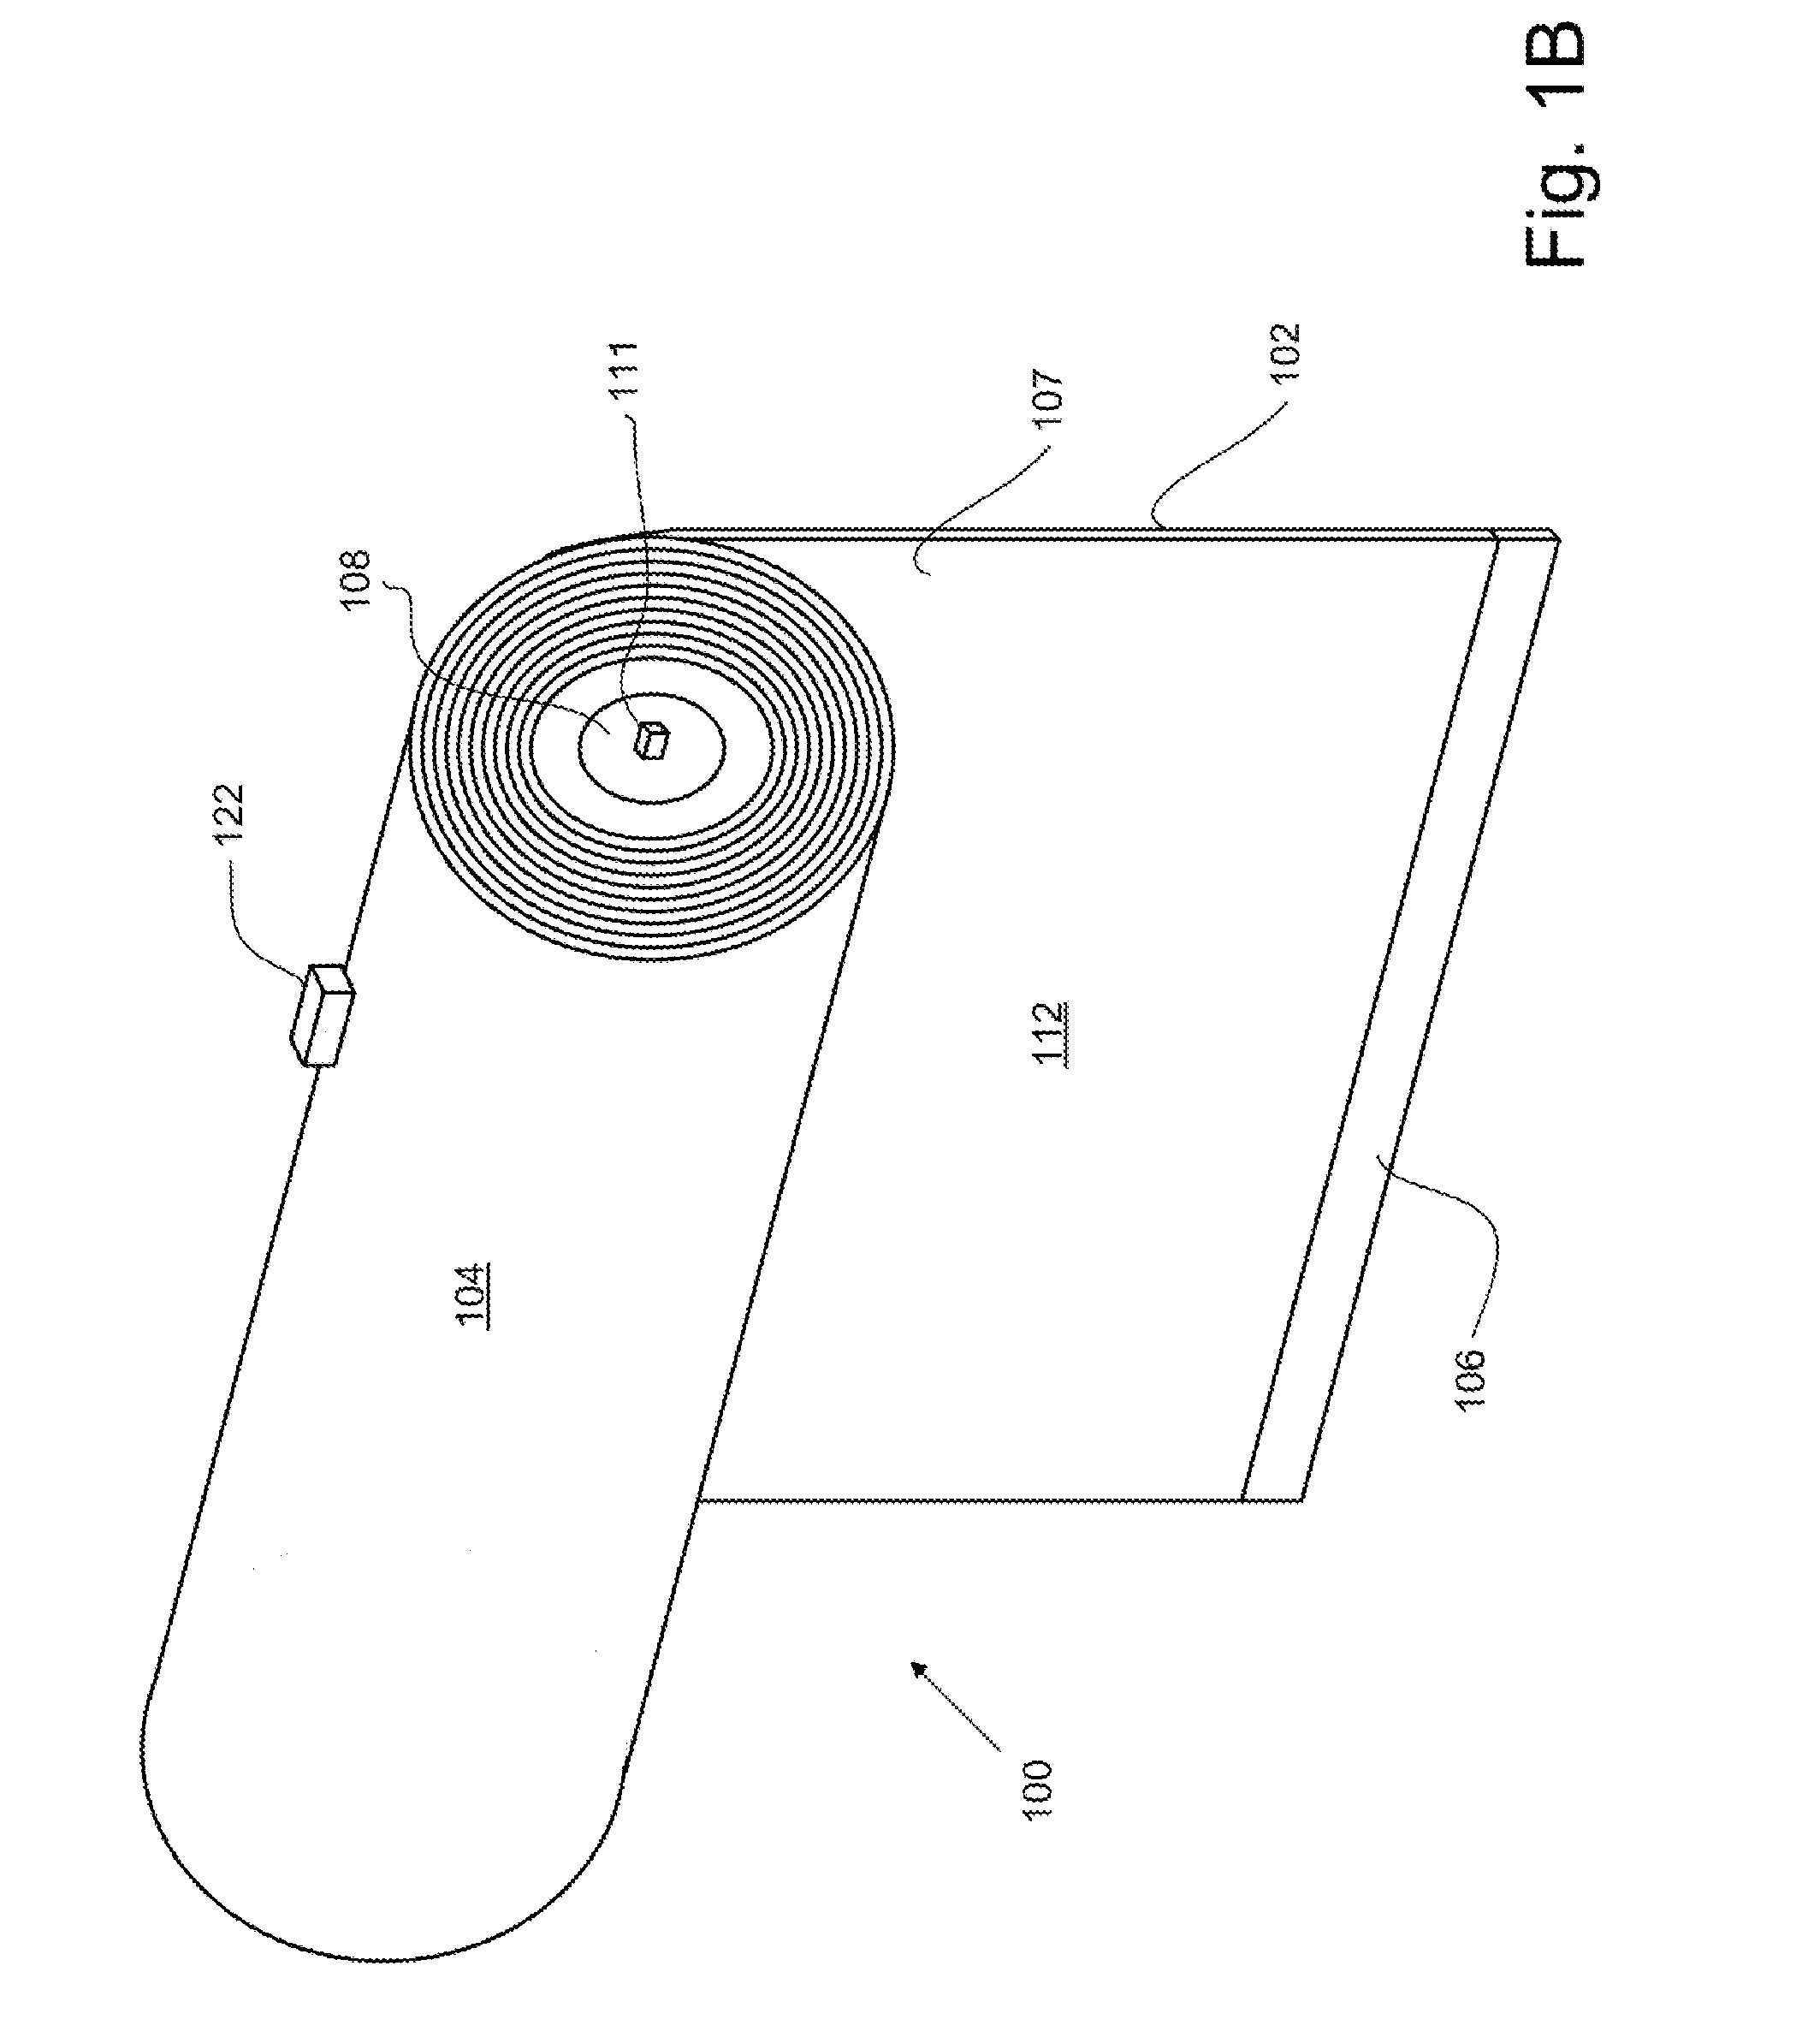 System and method for controlling one or more roller shades